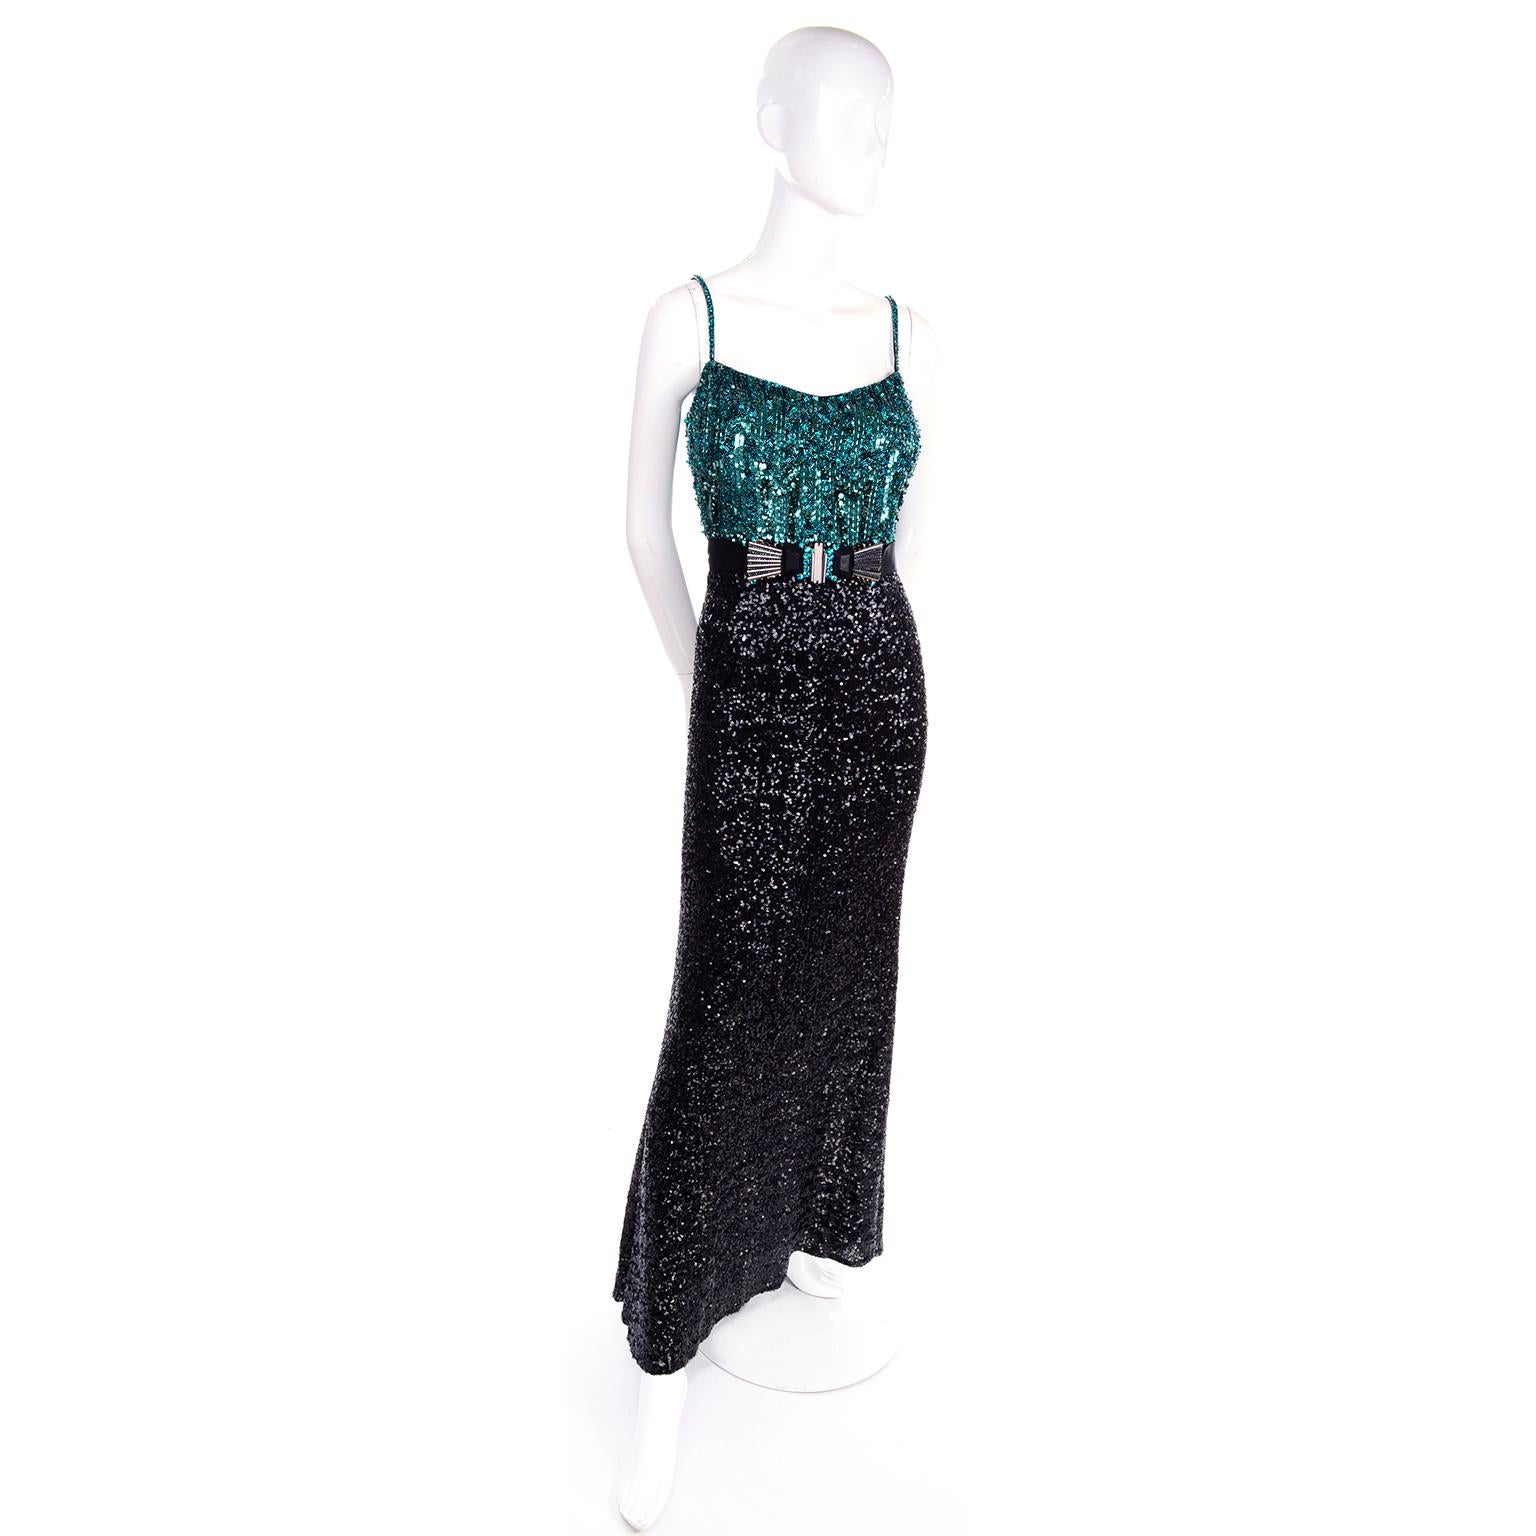 This vintage 1990s Badgley Mischka dress is so stunning in person! This luxe green beaded dress has spaghetti straps, beads, sequins and a black lower portion that has a slight stretch to it and is covered in tiny stacked sequins. We love the Art